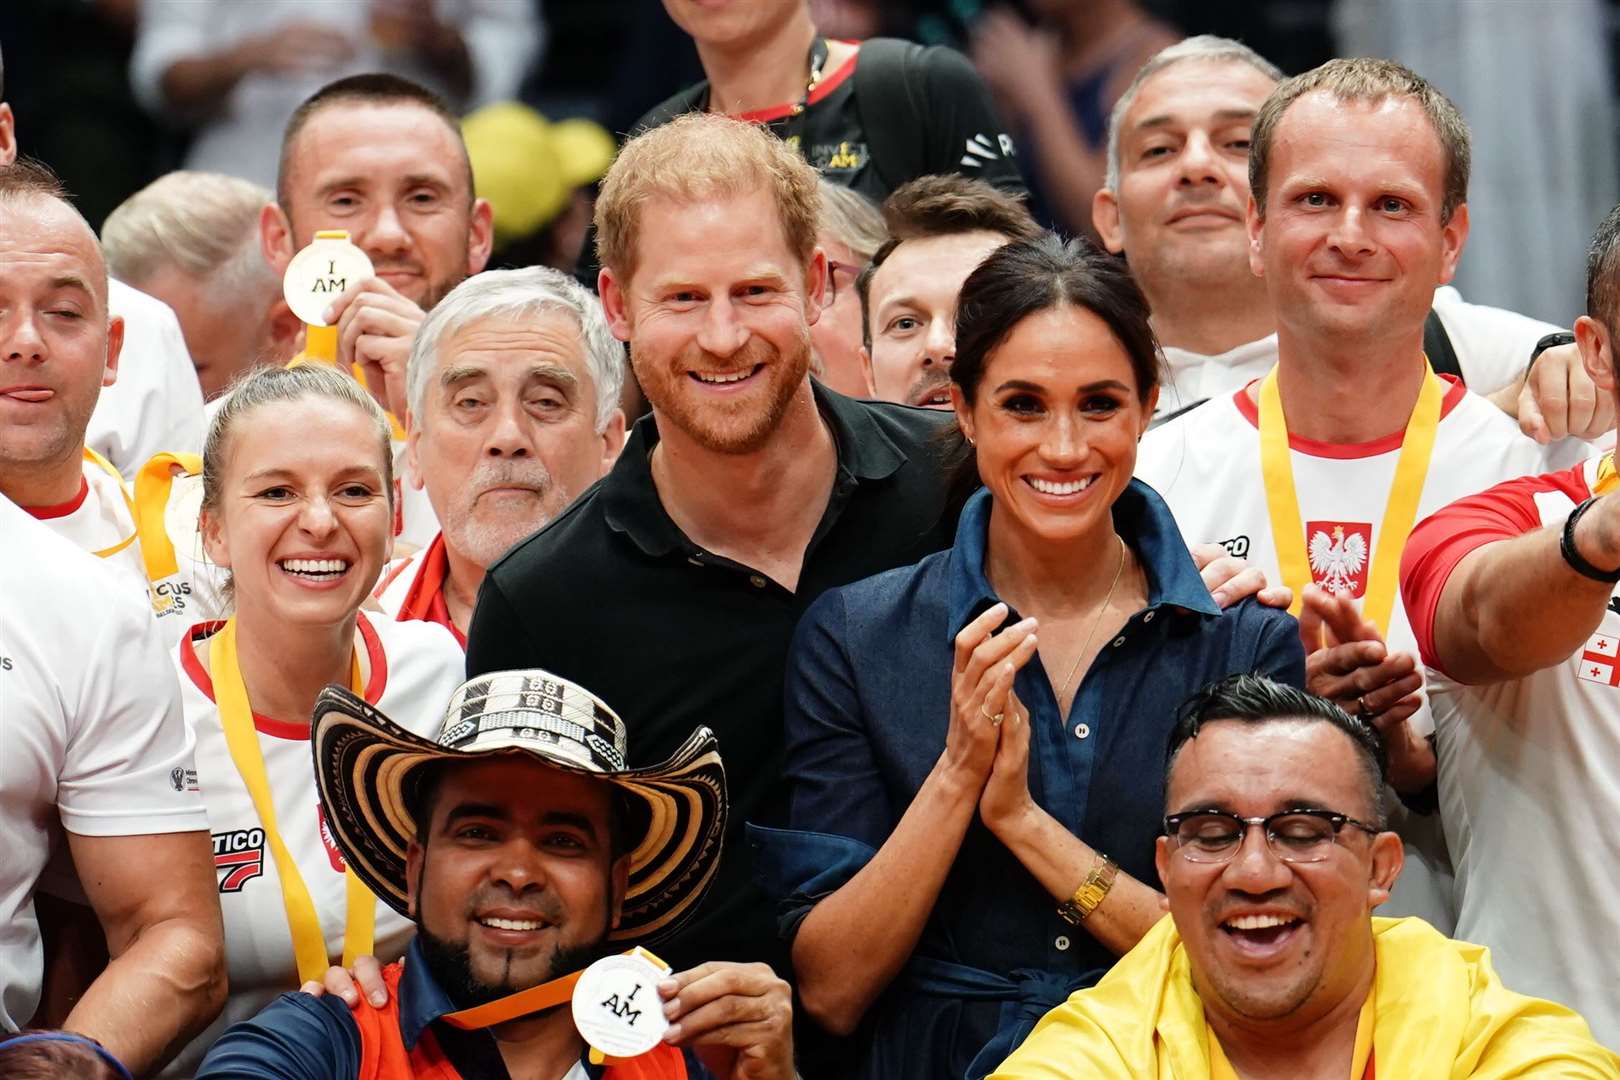 The Duke and Duchess of Sussex with medal winners at the sitting volleyball final during the Invictus Games in Dusseldorf in September (Jordan Pettitt/PA)